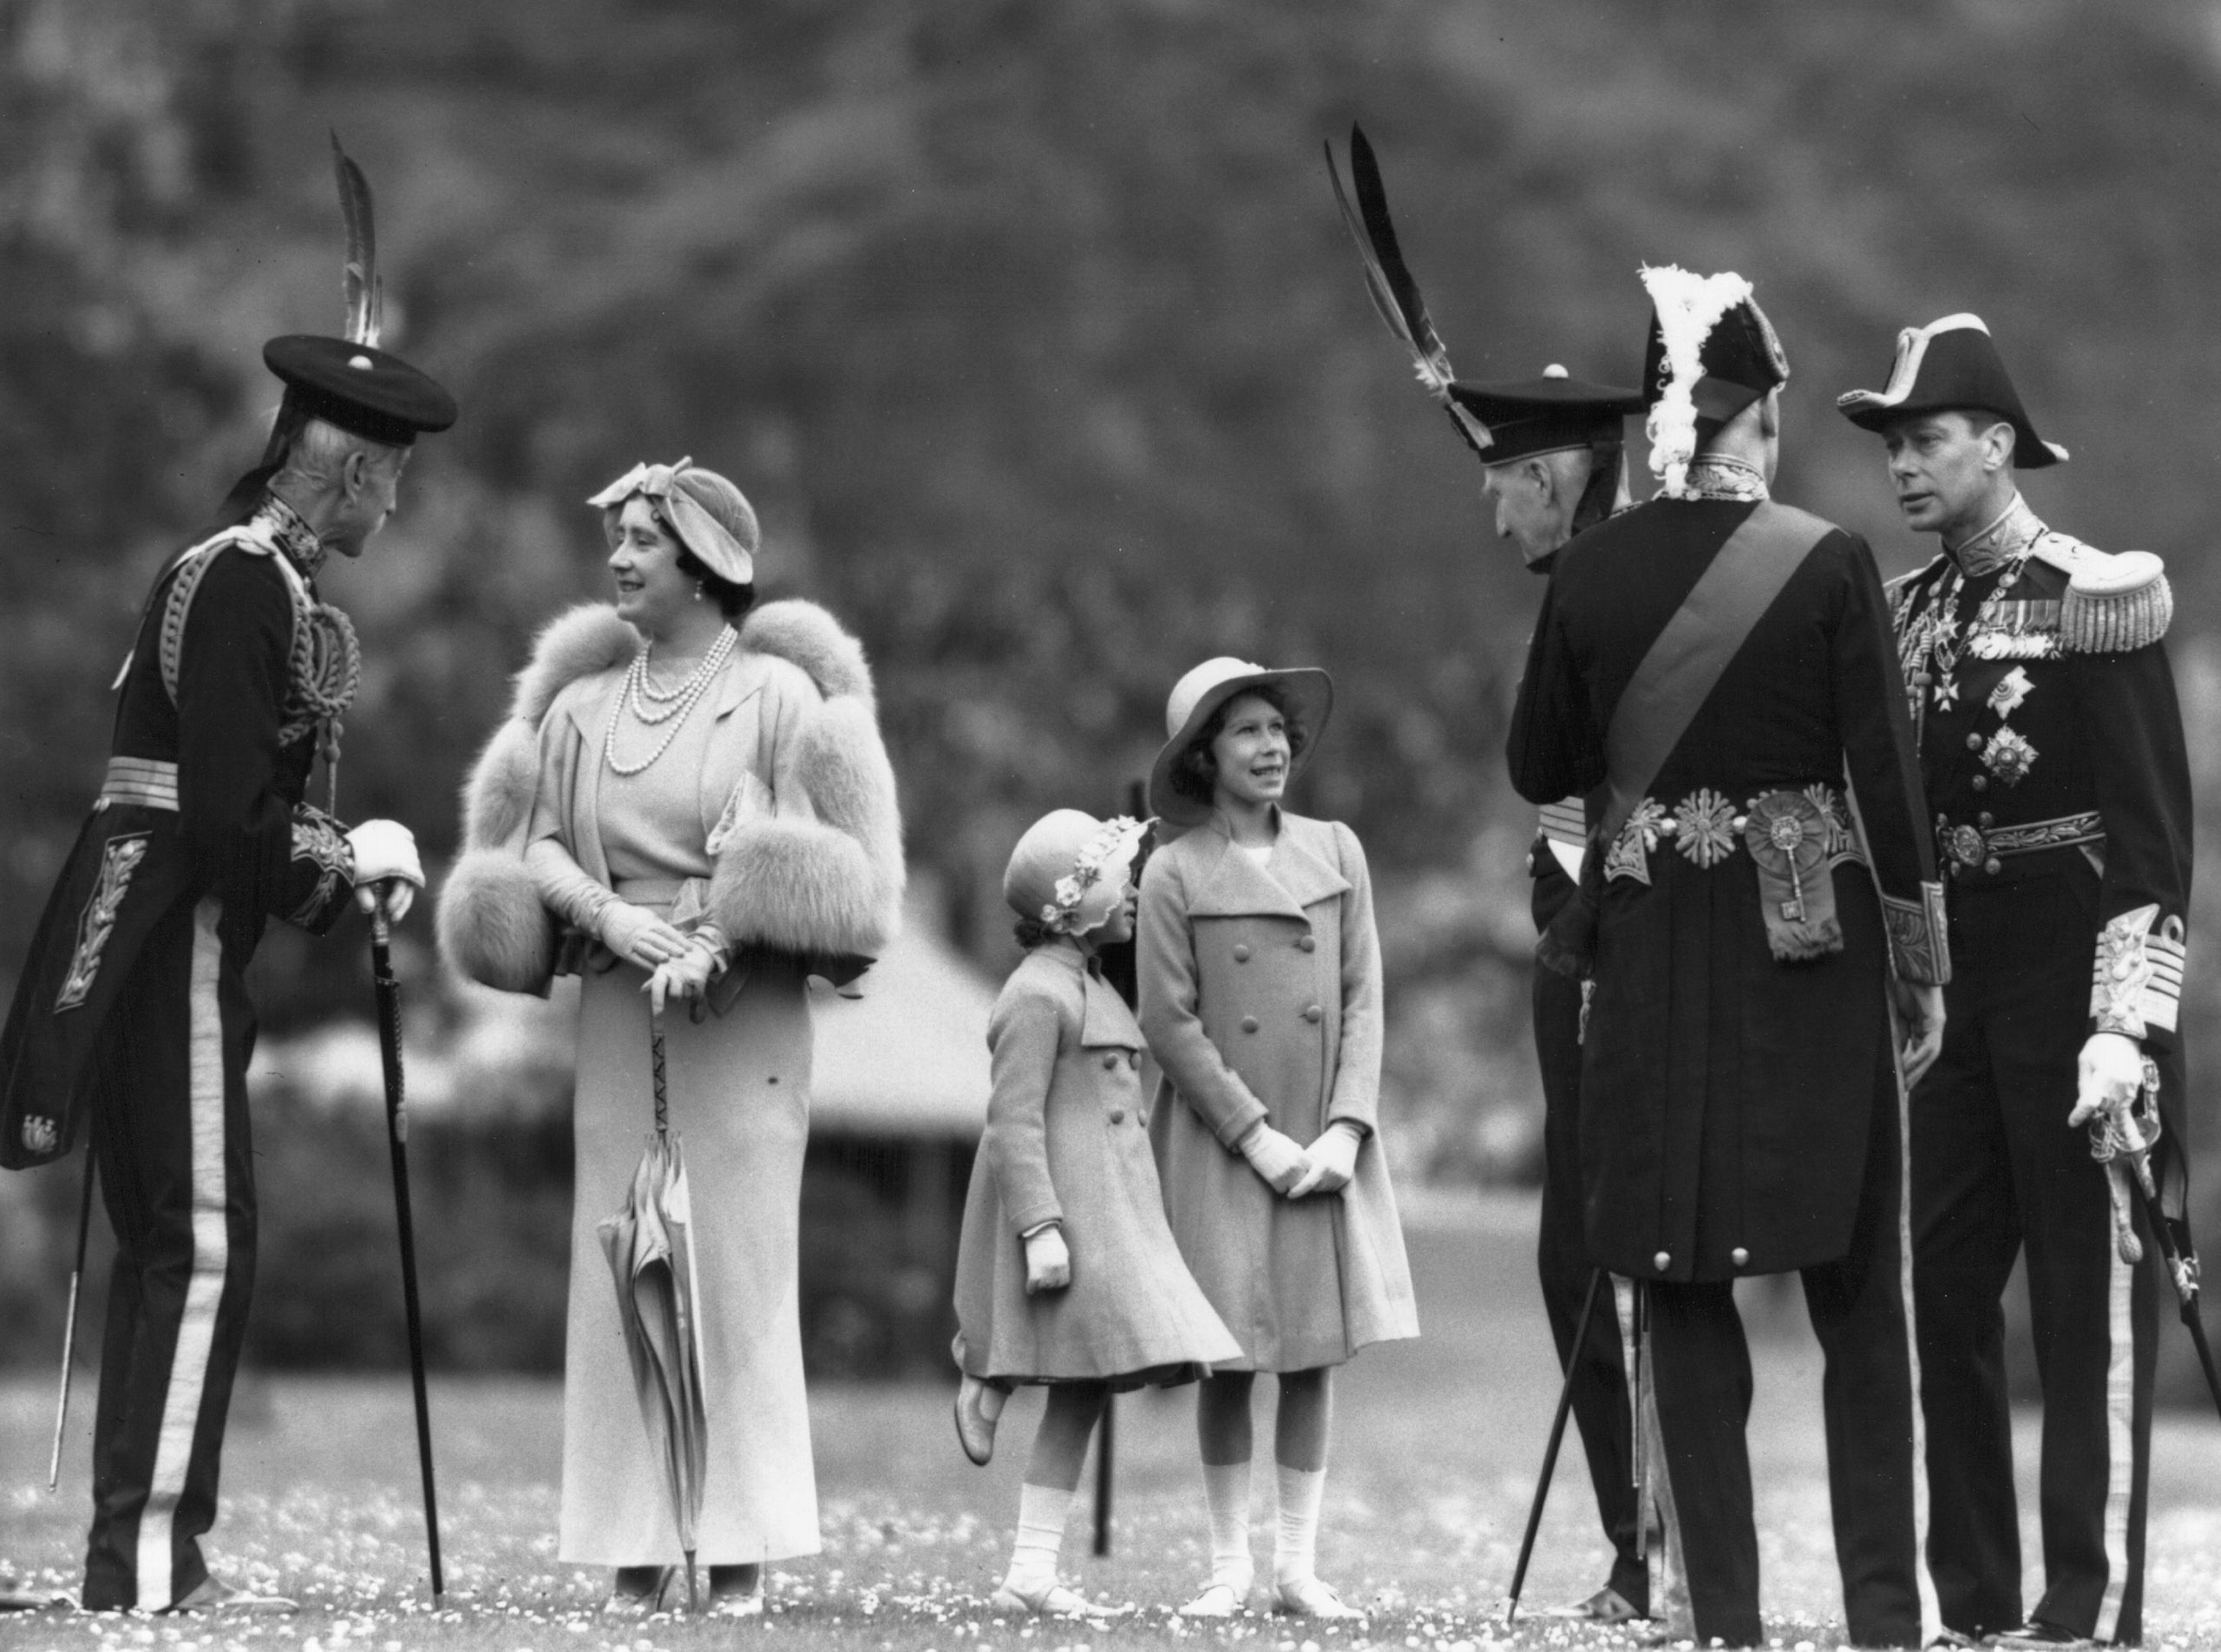 Queen Elizabeth talking to Lord Elphinstone during an inspection of the Royal Company of Archers at the Palace of Holyroodhouse, Edinburgh. Her husband King George VI is on the right; Princesses Elizabeth and Margaret Rose are in the center. July 1937.